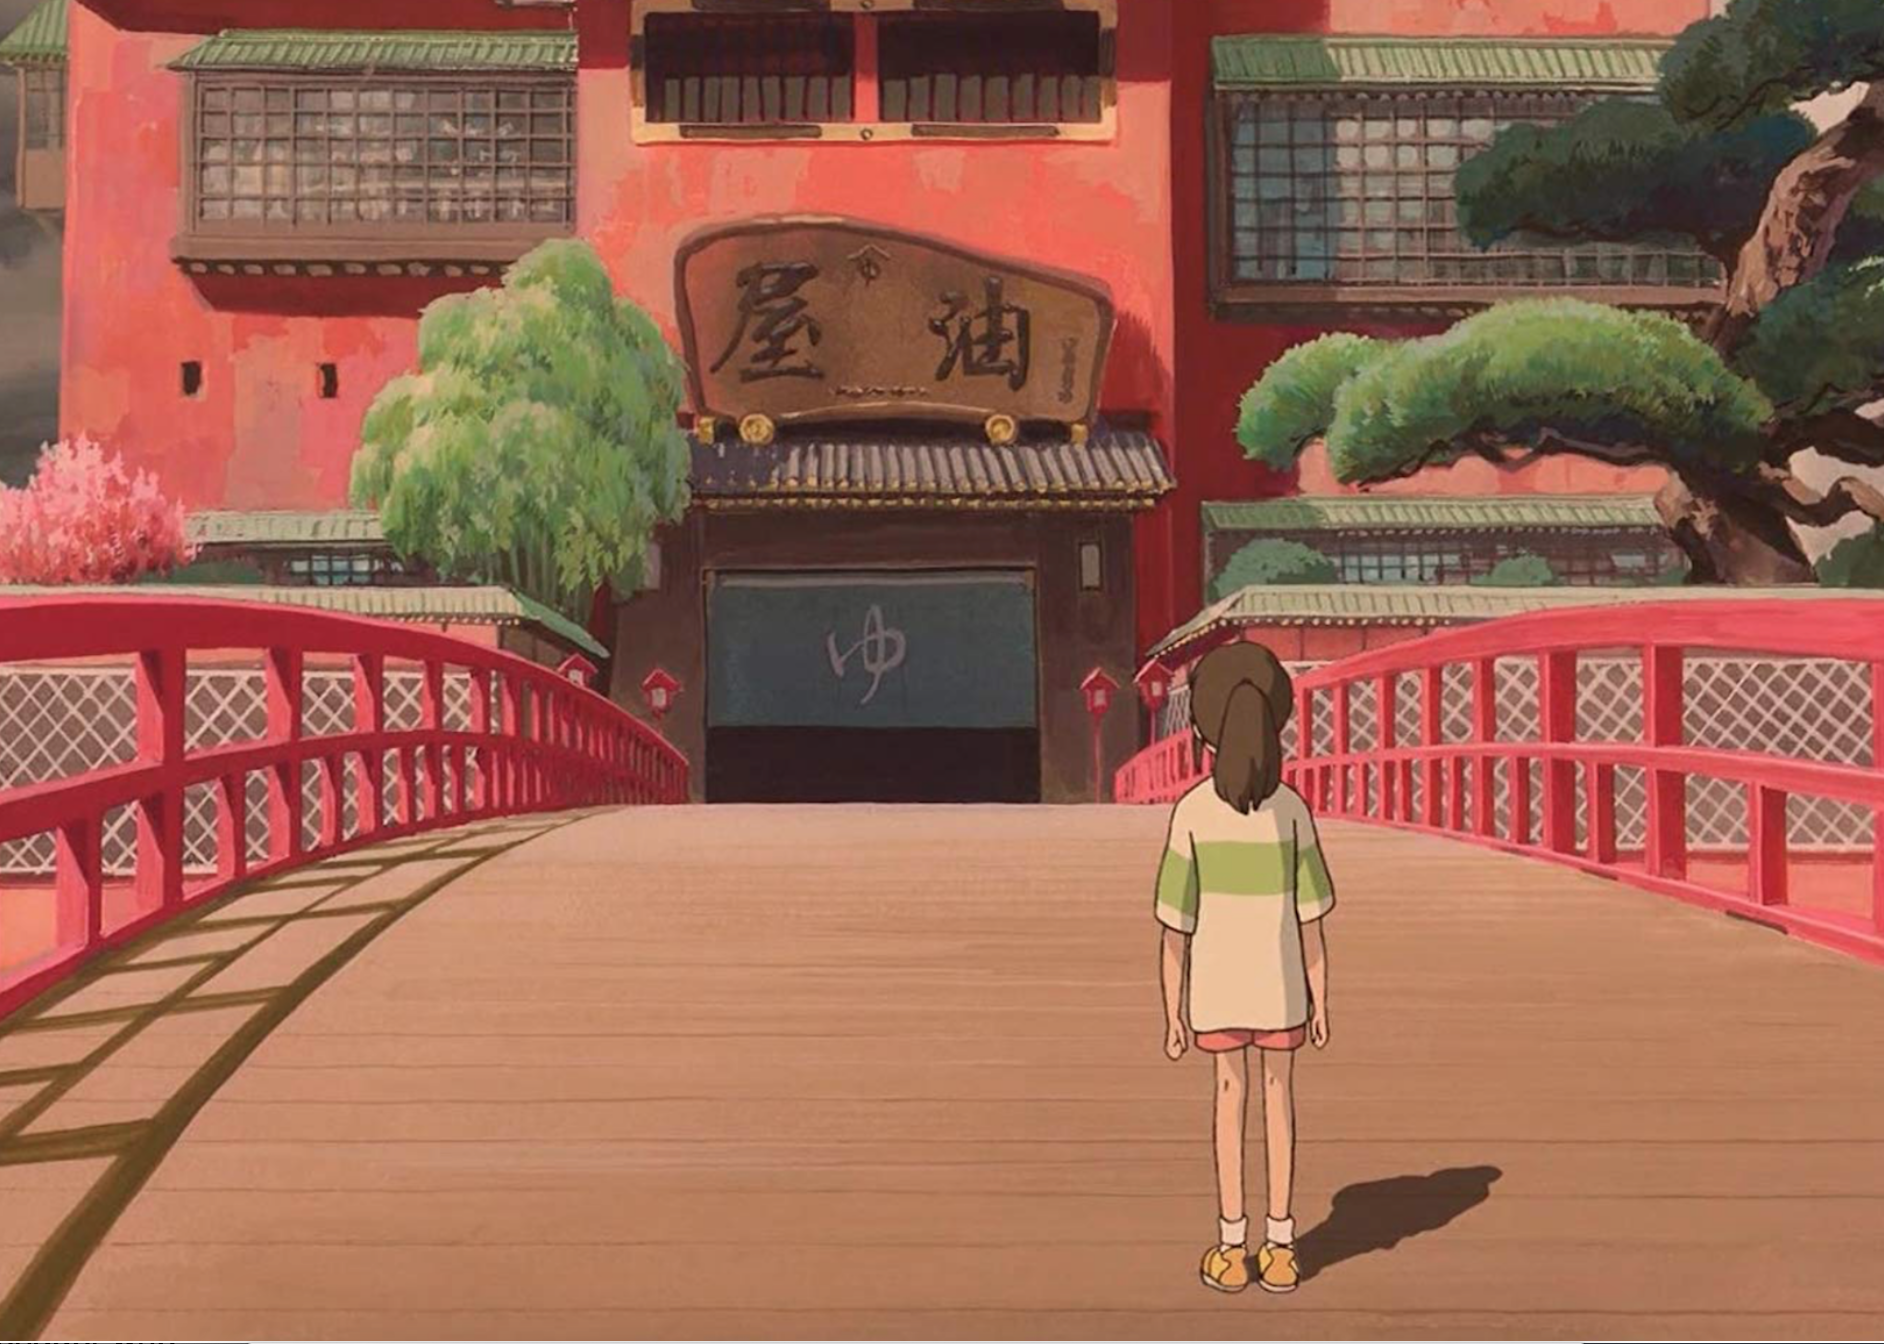 An animated still from Spirited Away.